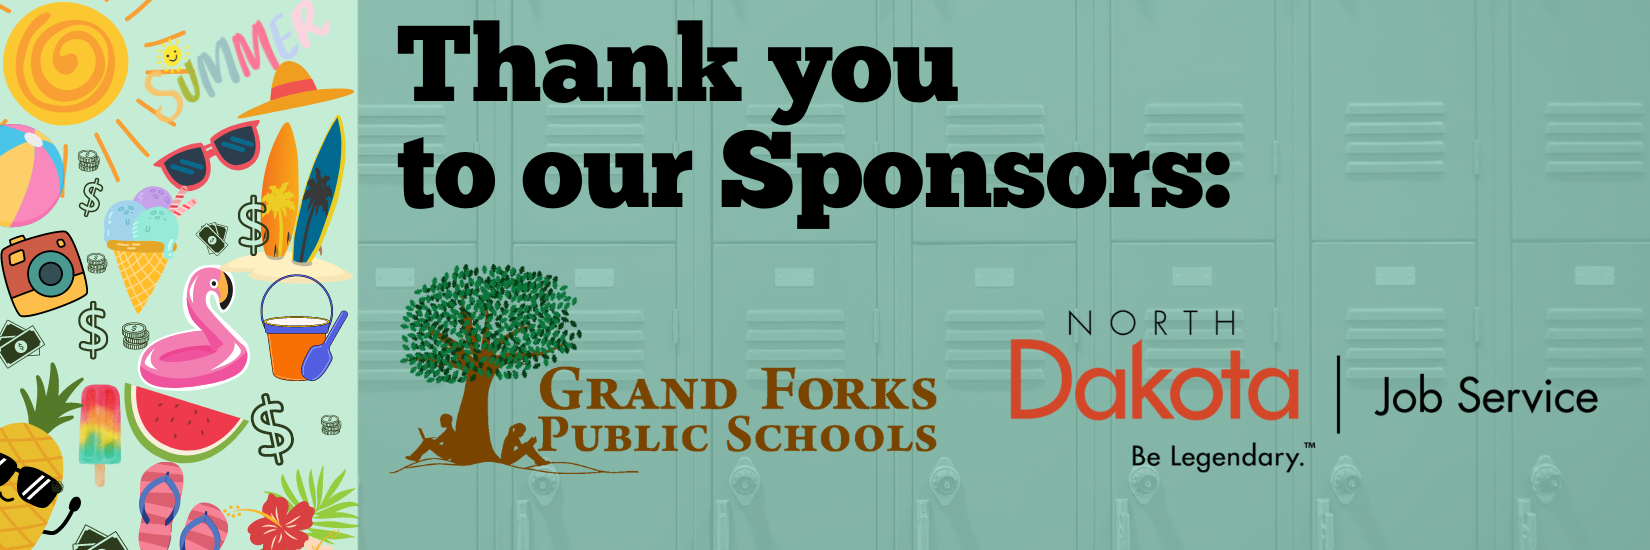 Thank you to our sponsors: Grand Forks Public Schools and Job Service North Dakota